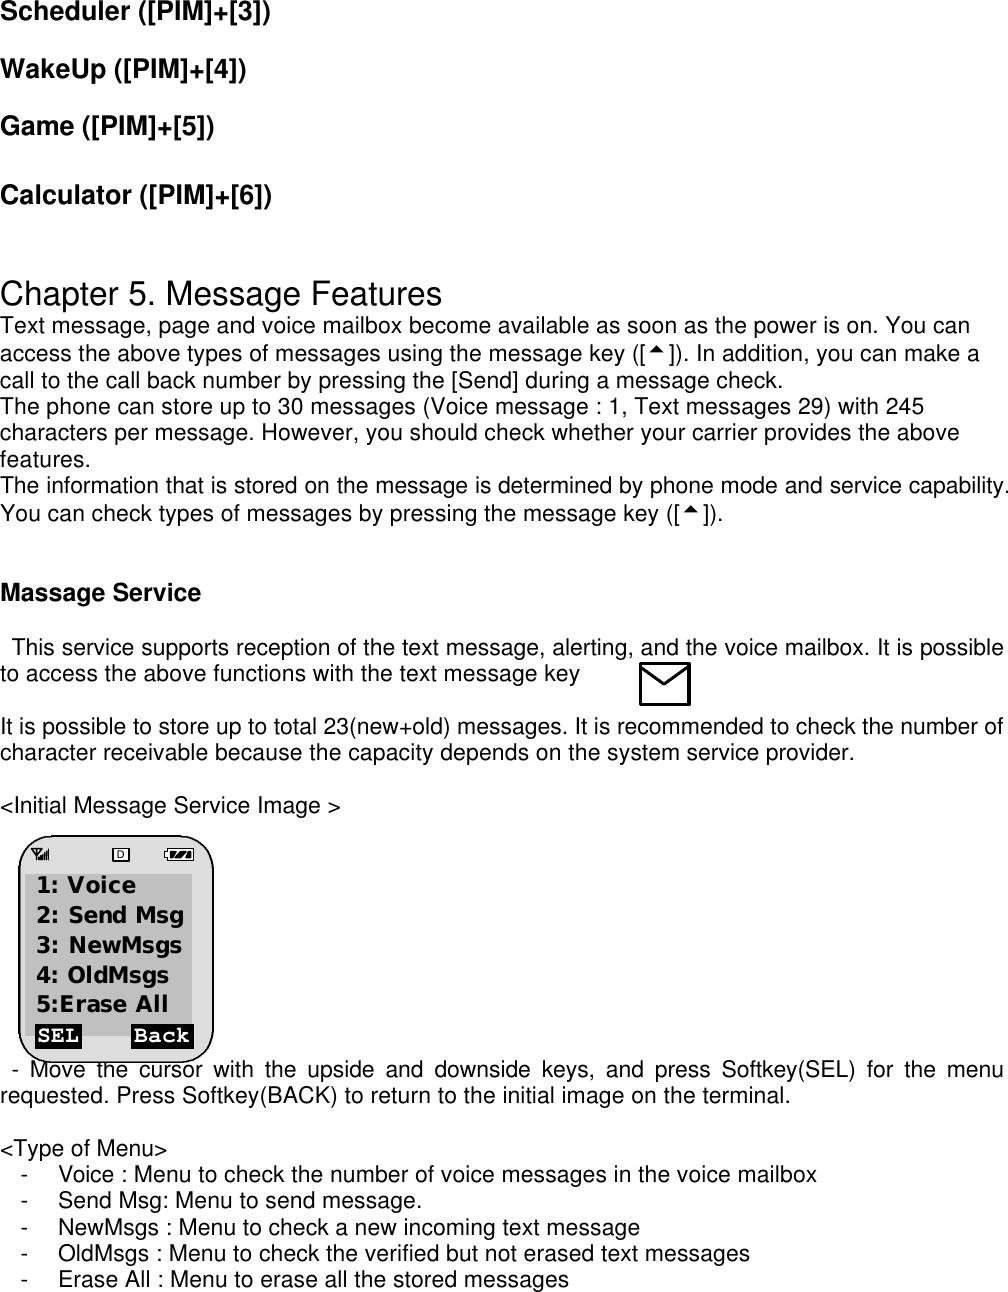 Scheduler ([PIM]+[3])  WakeUp ([PIM]+[4])  Game ([PIM]+[5])  Calculator ([PIM]+[6])   Chapter 5. Message Features Text message, page and voice mailbox become available as soon as the power is on. You can access the above types of messages using the message key ([5]). In addition, you can make a call to the call back number by pressing the [Send] during a message check. The phone can store up to 30 messages (Voice message : 1, Text messages 29) with 245 characters per message. However, you should check whether your carrier provides the above features. The information that is stored on the message is determined by phone mode and service capability. You can check types of messages by pressing the message key ([5]).   Massage Service    This service supports reception of the text message, alerting, and the voice mailbox. It is possible to access the above functions with the text message key      It is possible to store up to total 23(new+old) messages. It is recommended to check the number of character receivable because the capacity depends on the system service provider.   &lt;Initial Message Service Image &gt;           - Move the cursor with the upside and downside keys, and press Softkey(SEL) for the menu requested. Press Softkey(BACK) to return to the initial image on the terminal.  &lt;Type of Menu&gt; - Voice : Menu to check the number of voice messages in the voice mailbox - Send Msg: Menu to send message.  - NewMsgs : Menu to check a new incoming text message   - OldMsgs : Menu to check the verified but not erased text messages  - Erase All : Menu to erase all the stored messages     SEL Back D 1: Voice 2: Send Msg 3: NewMsgs 4: OldMsgs  5:Erase All 